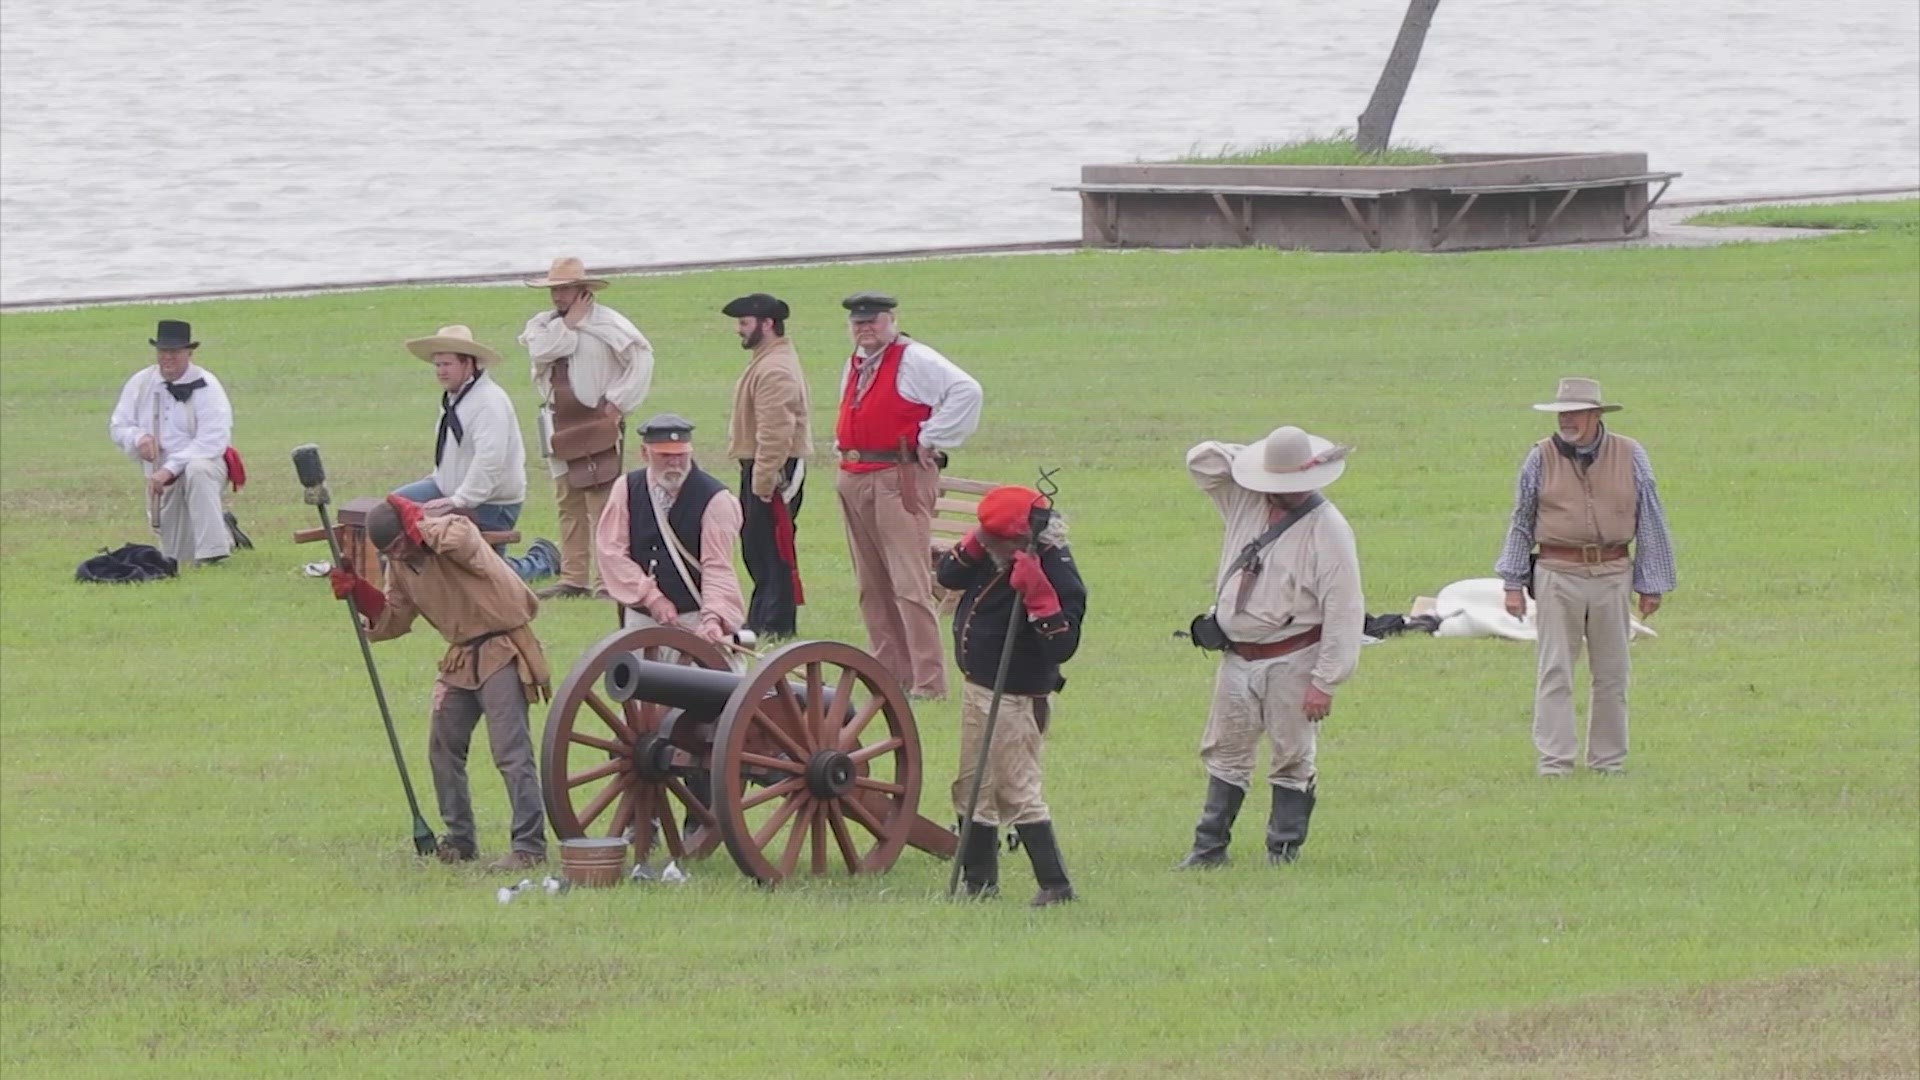 On Saturday, people got to see and experience living history. Reenactments showed people what life was like in 1836.